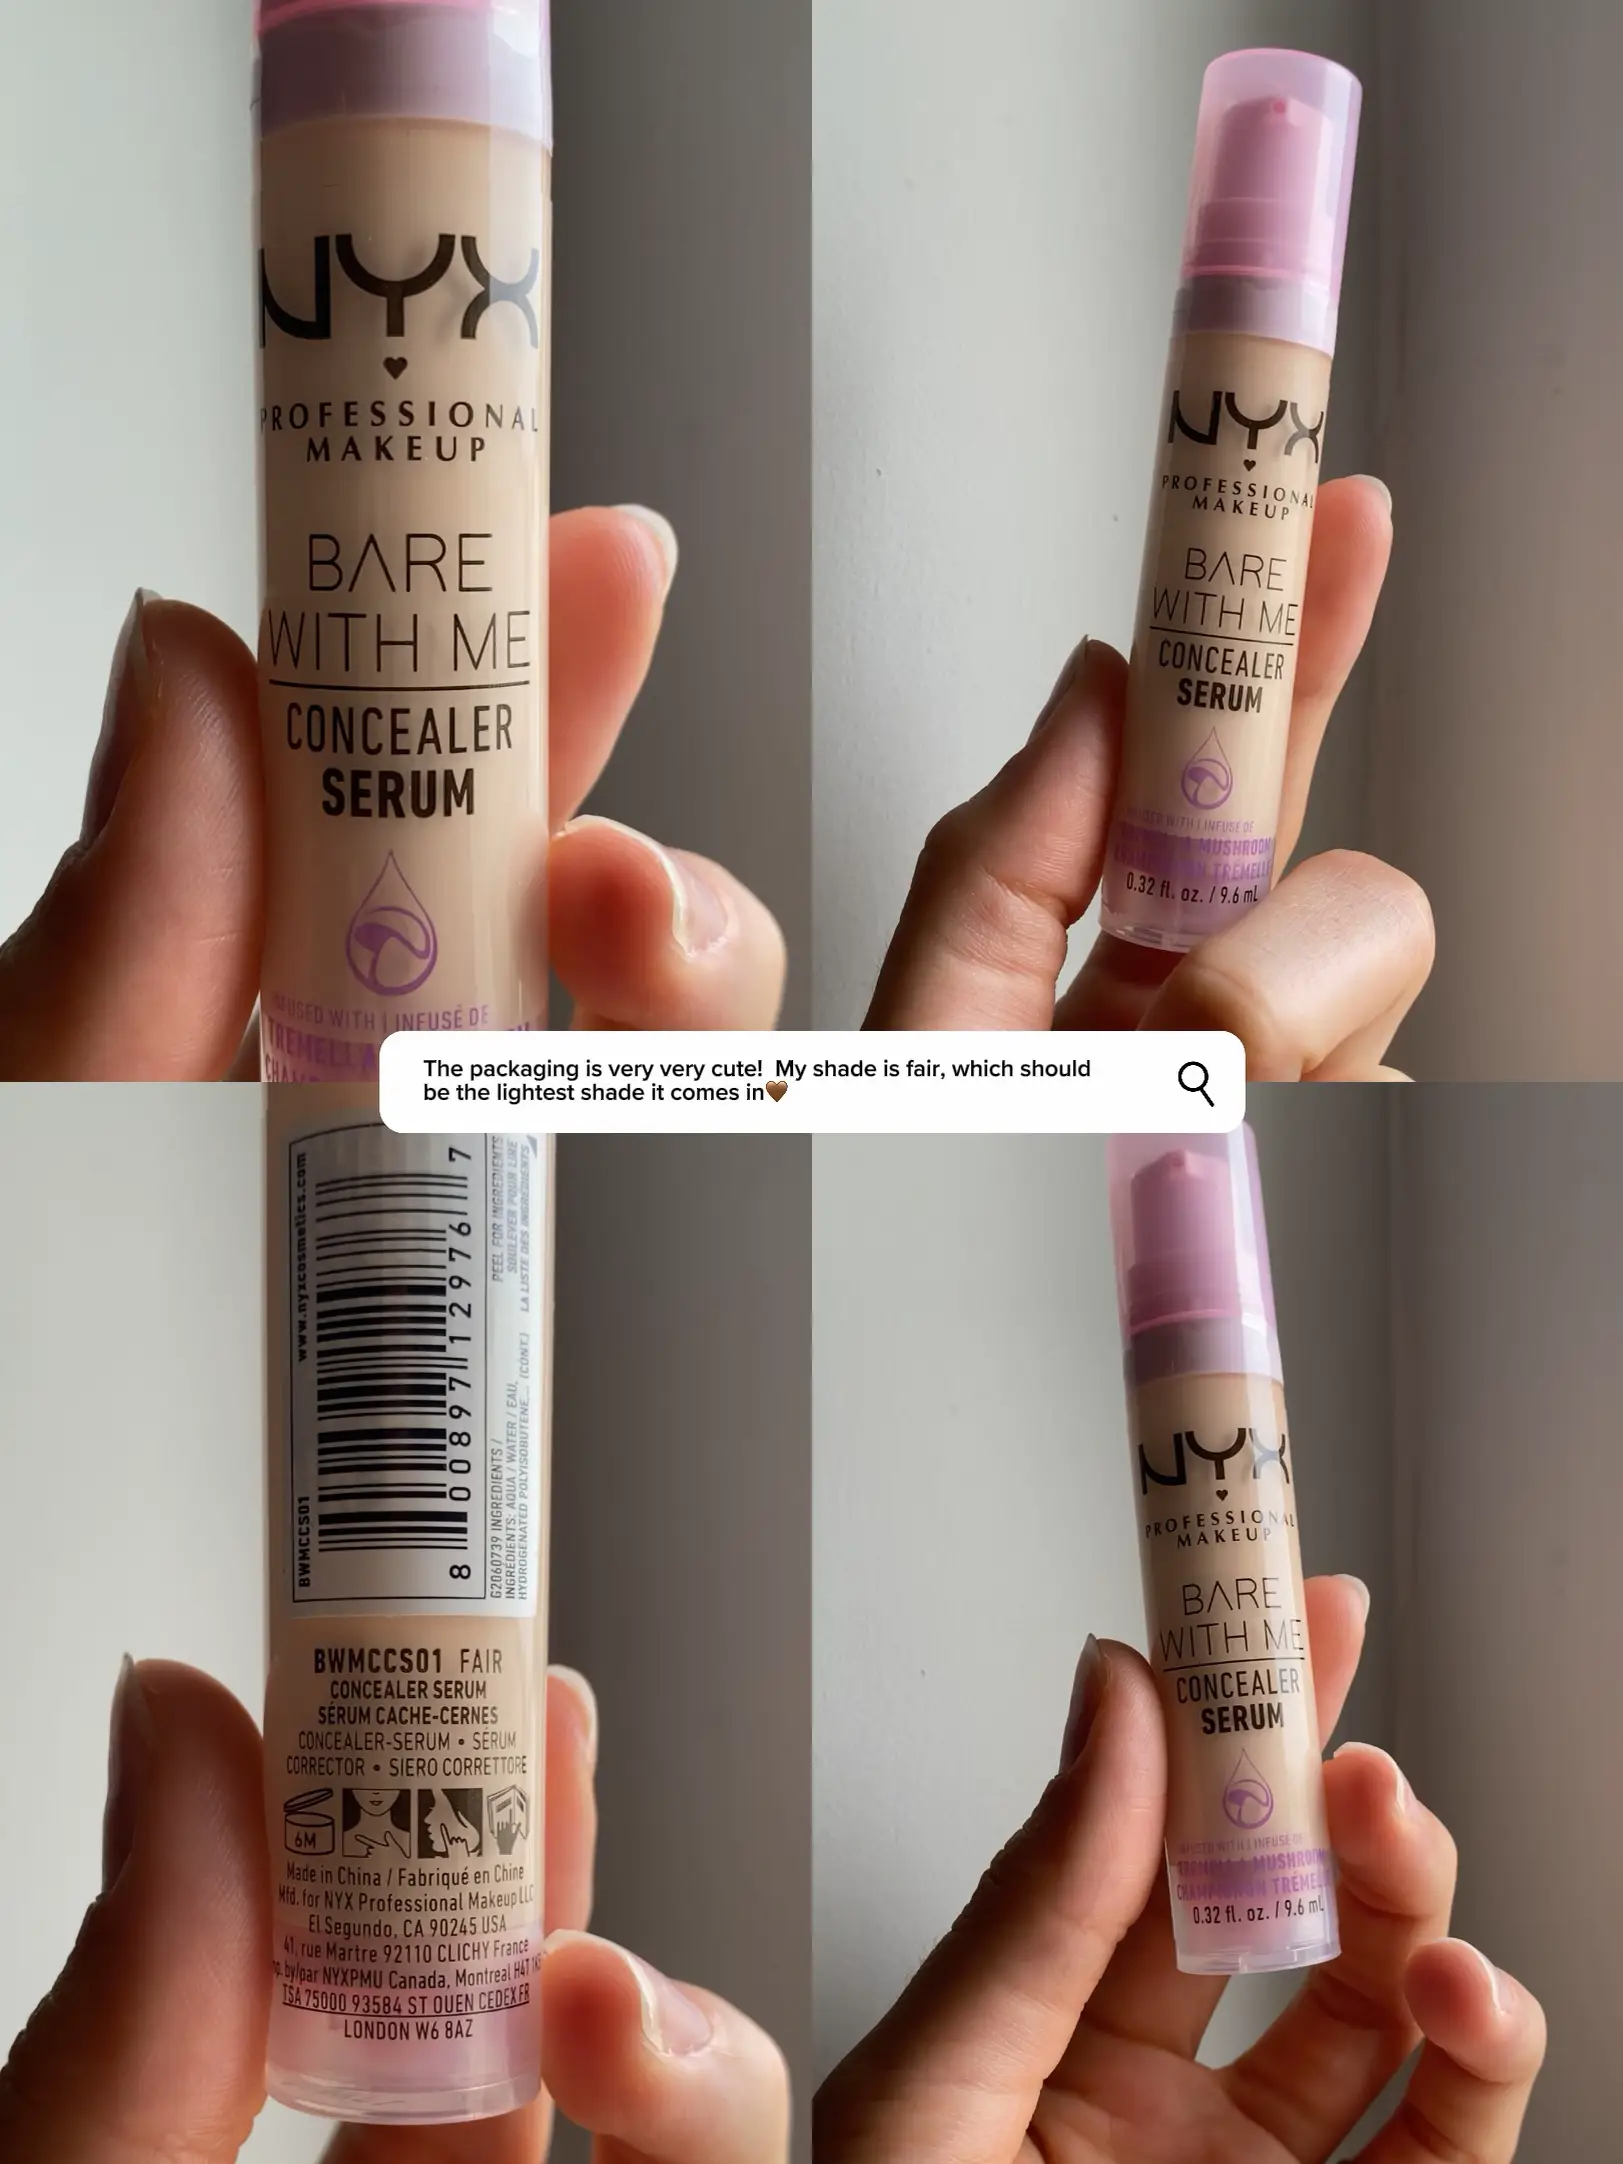 NYX Bare With Me Concealer | Is it WORTH IT?😱 | Gallery posted by  dolcevitamakeup | Lemon8